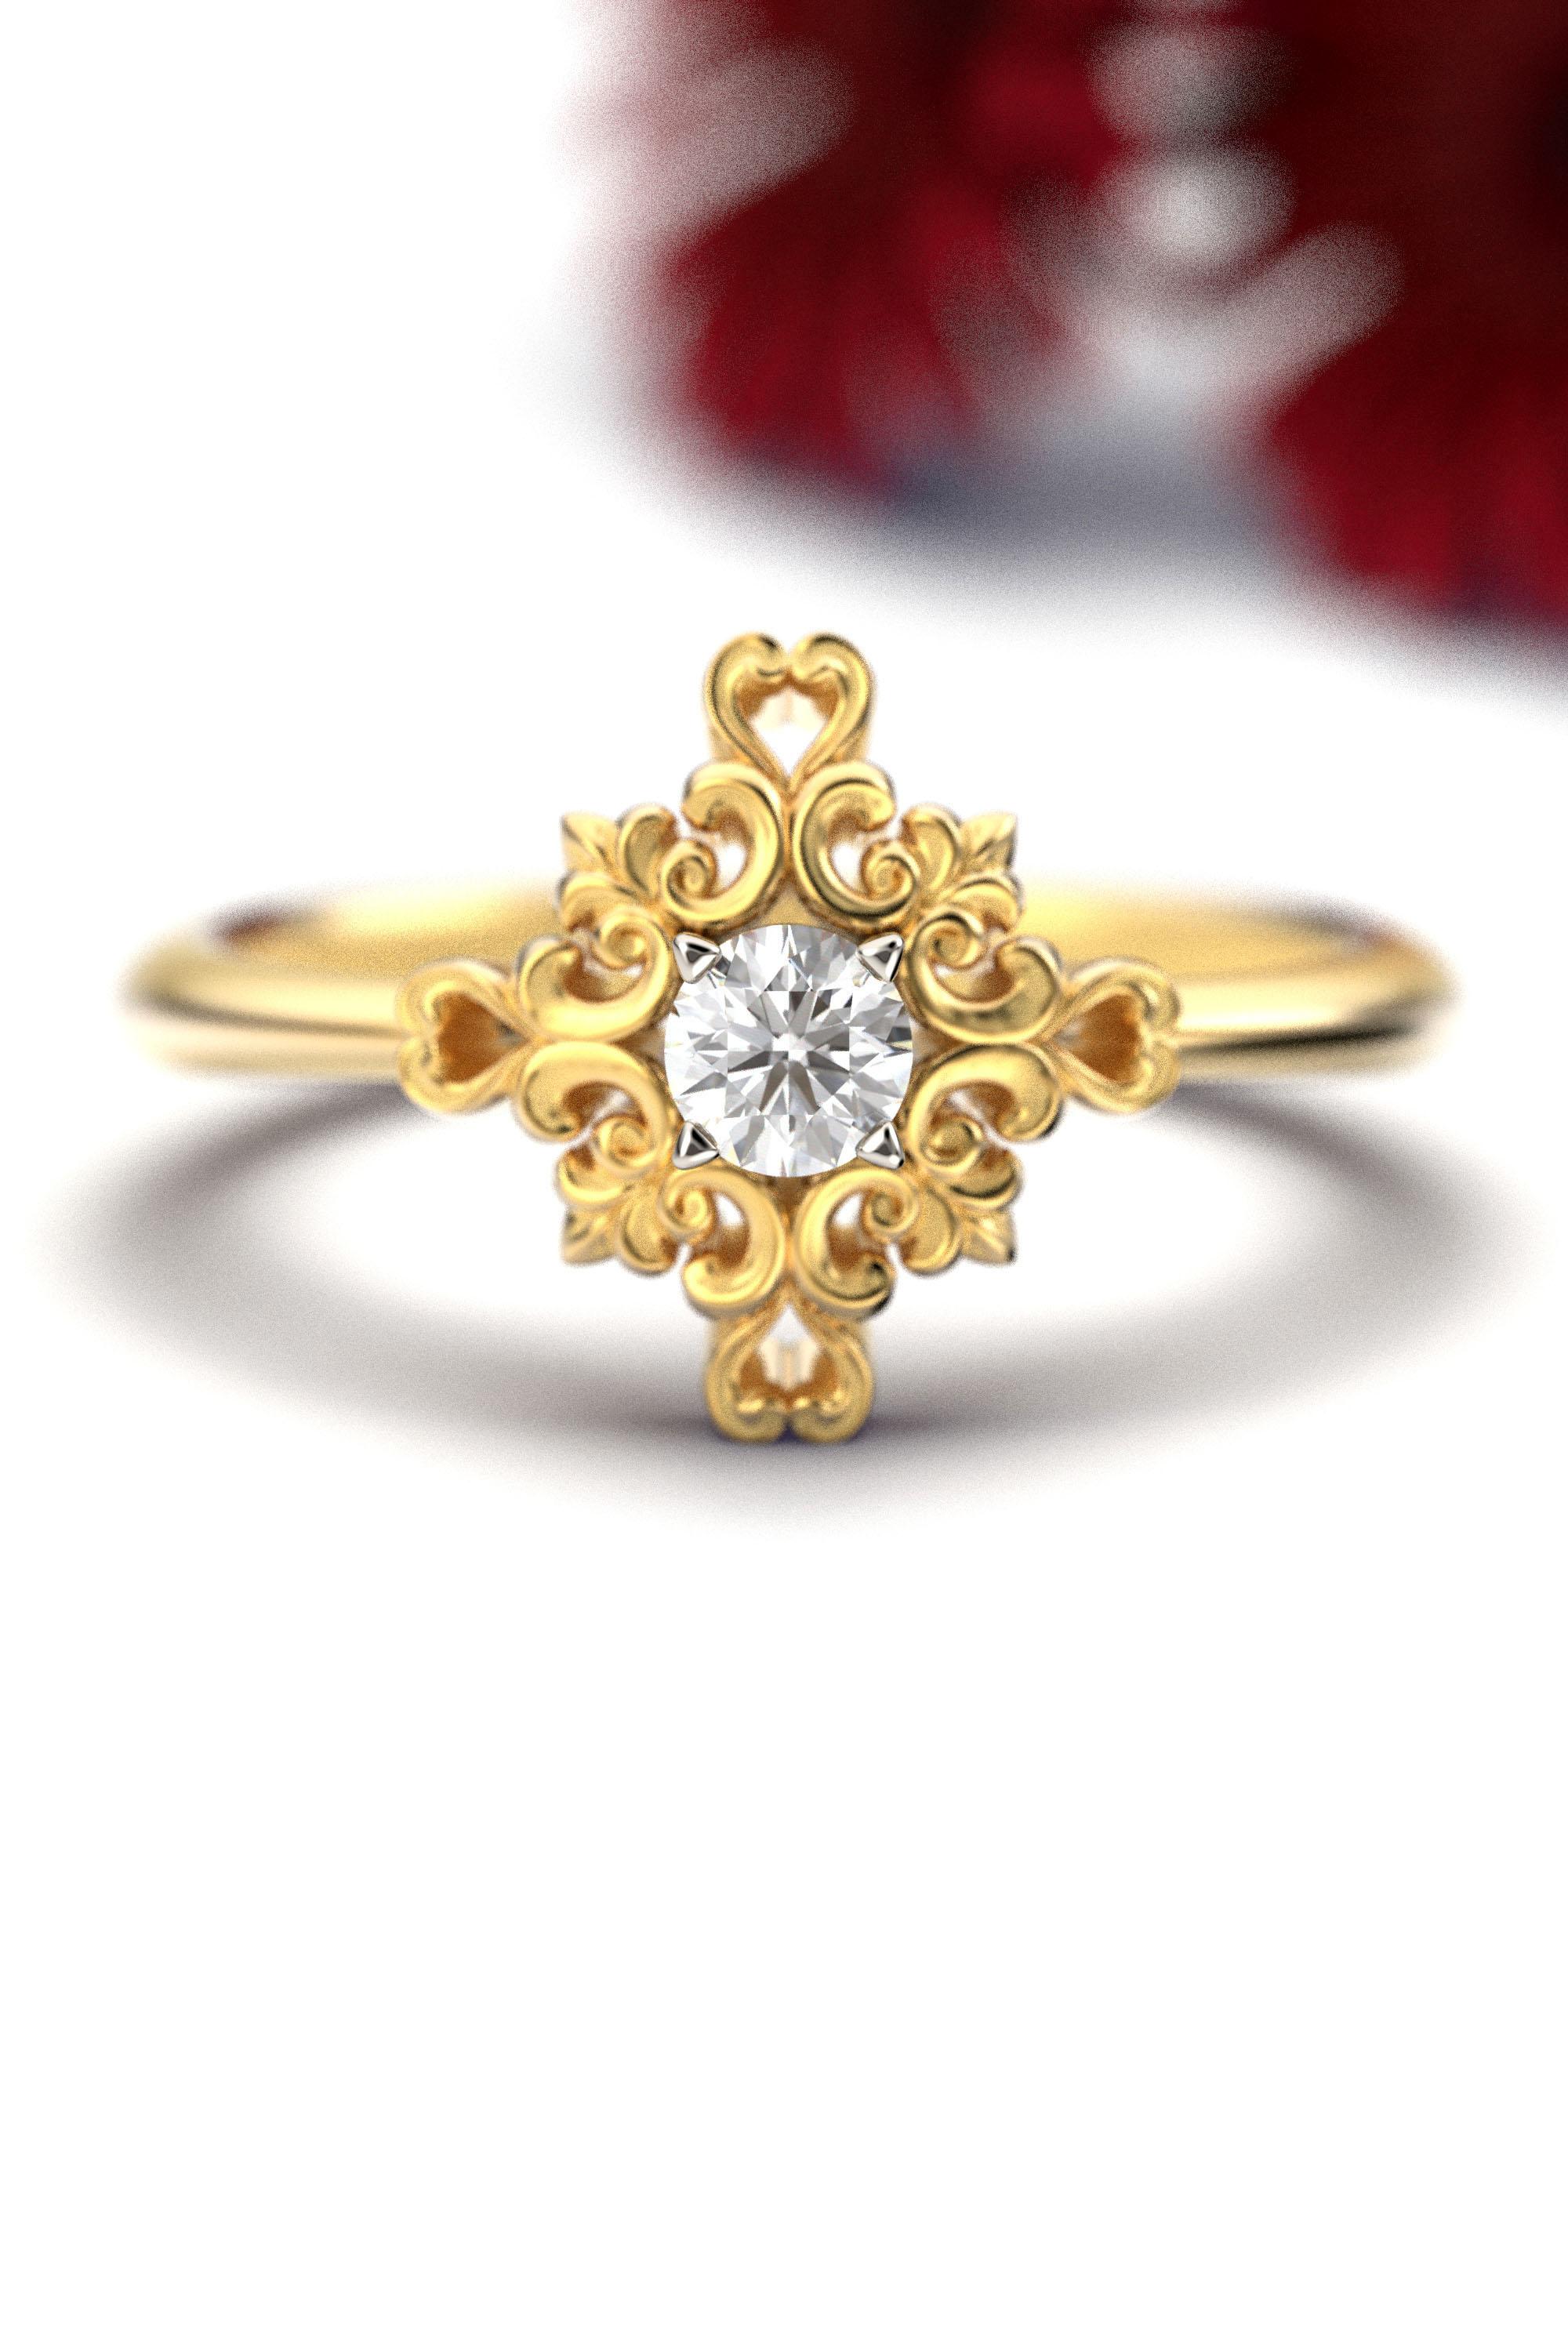 For Sale:  14k Gold Italian Diamond Engagement Ring with Baroque Setting 5